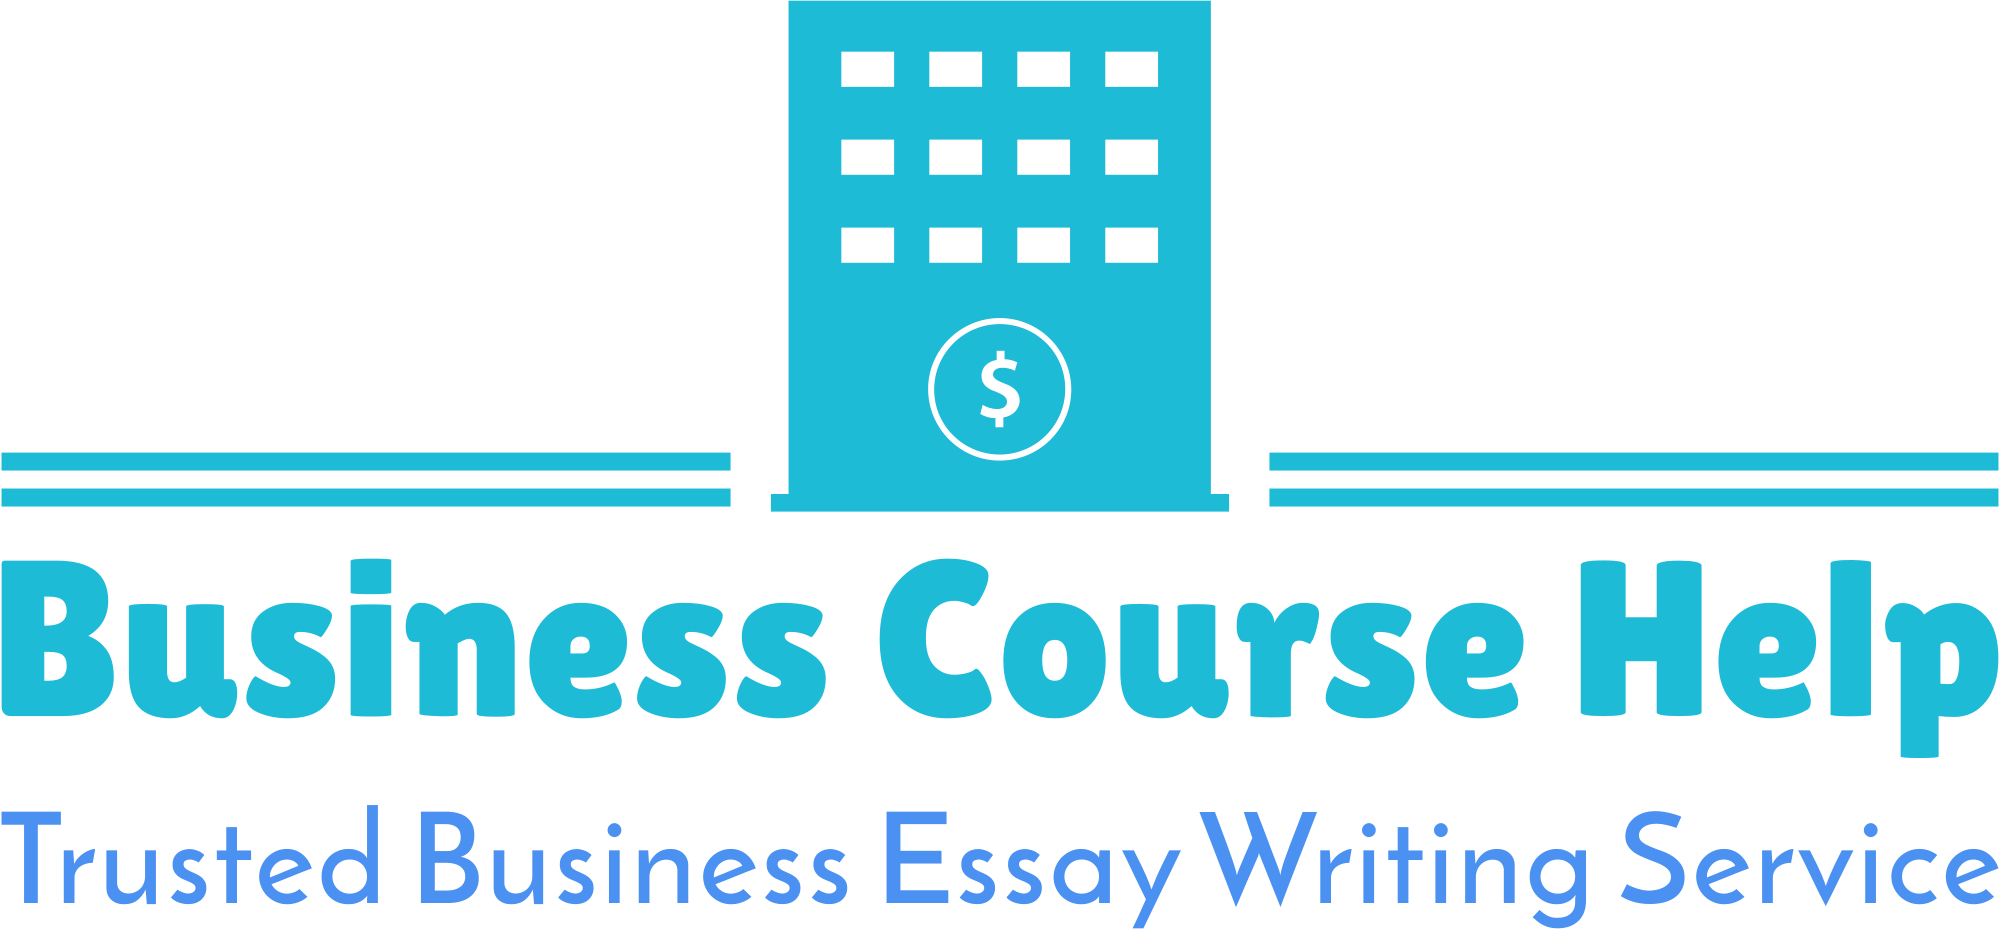 Business Course Help